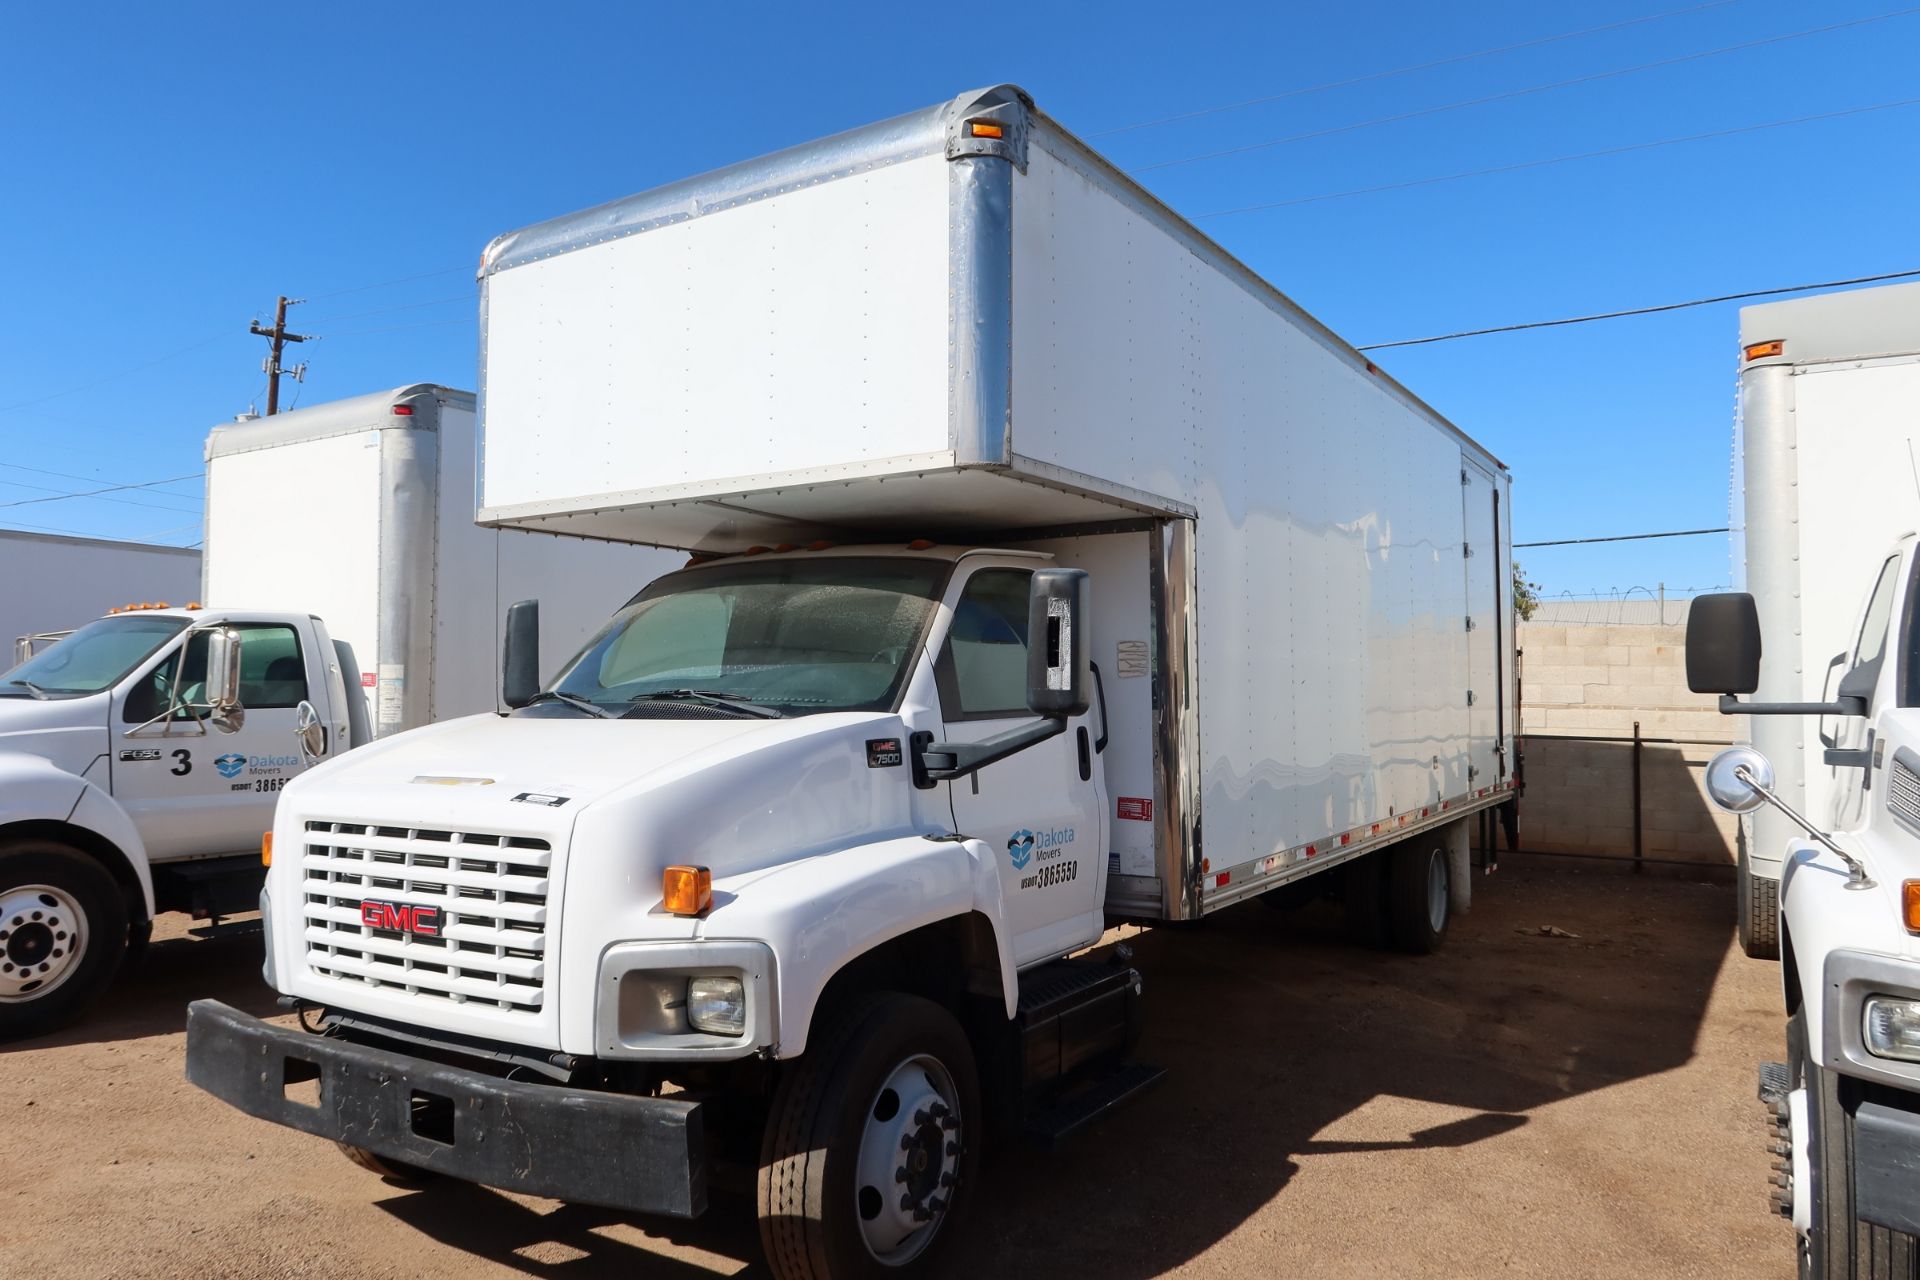 2004 GMC C7500 25' BOX TRUCK VIN. 1GD57B1C65F517183, MAXON LIFT GATE, CONTENTS INCLUDED. - Image 3 of 12